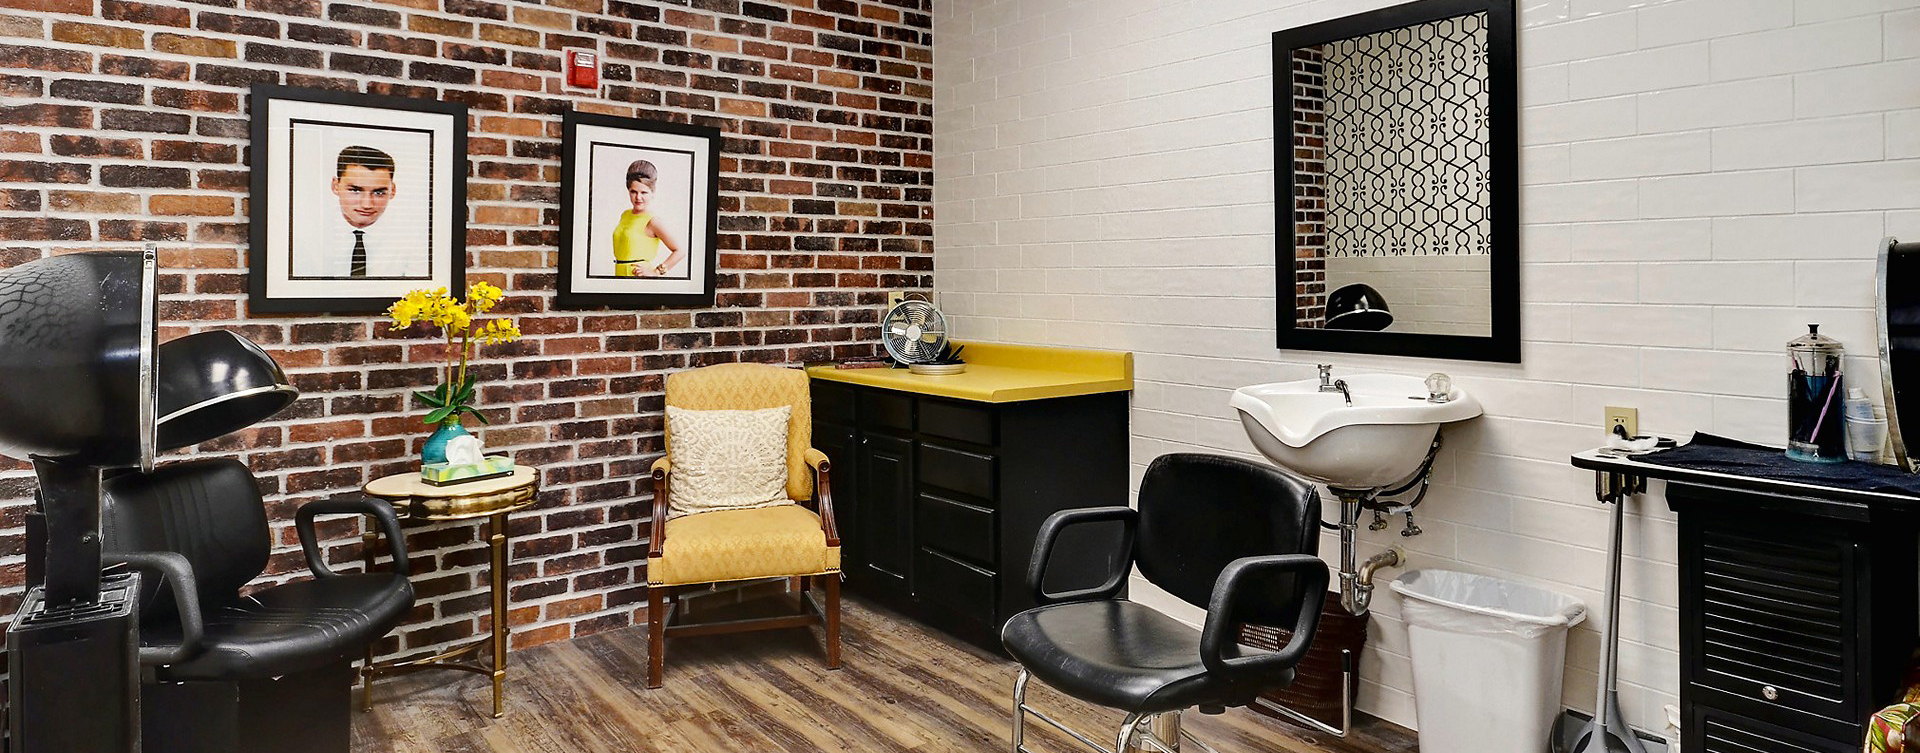 Receive personalized, at-home treatment from our stylist in the salon at Bickford of Crystal Lake